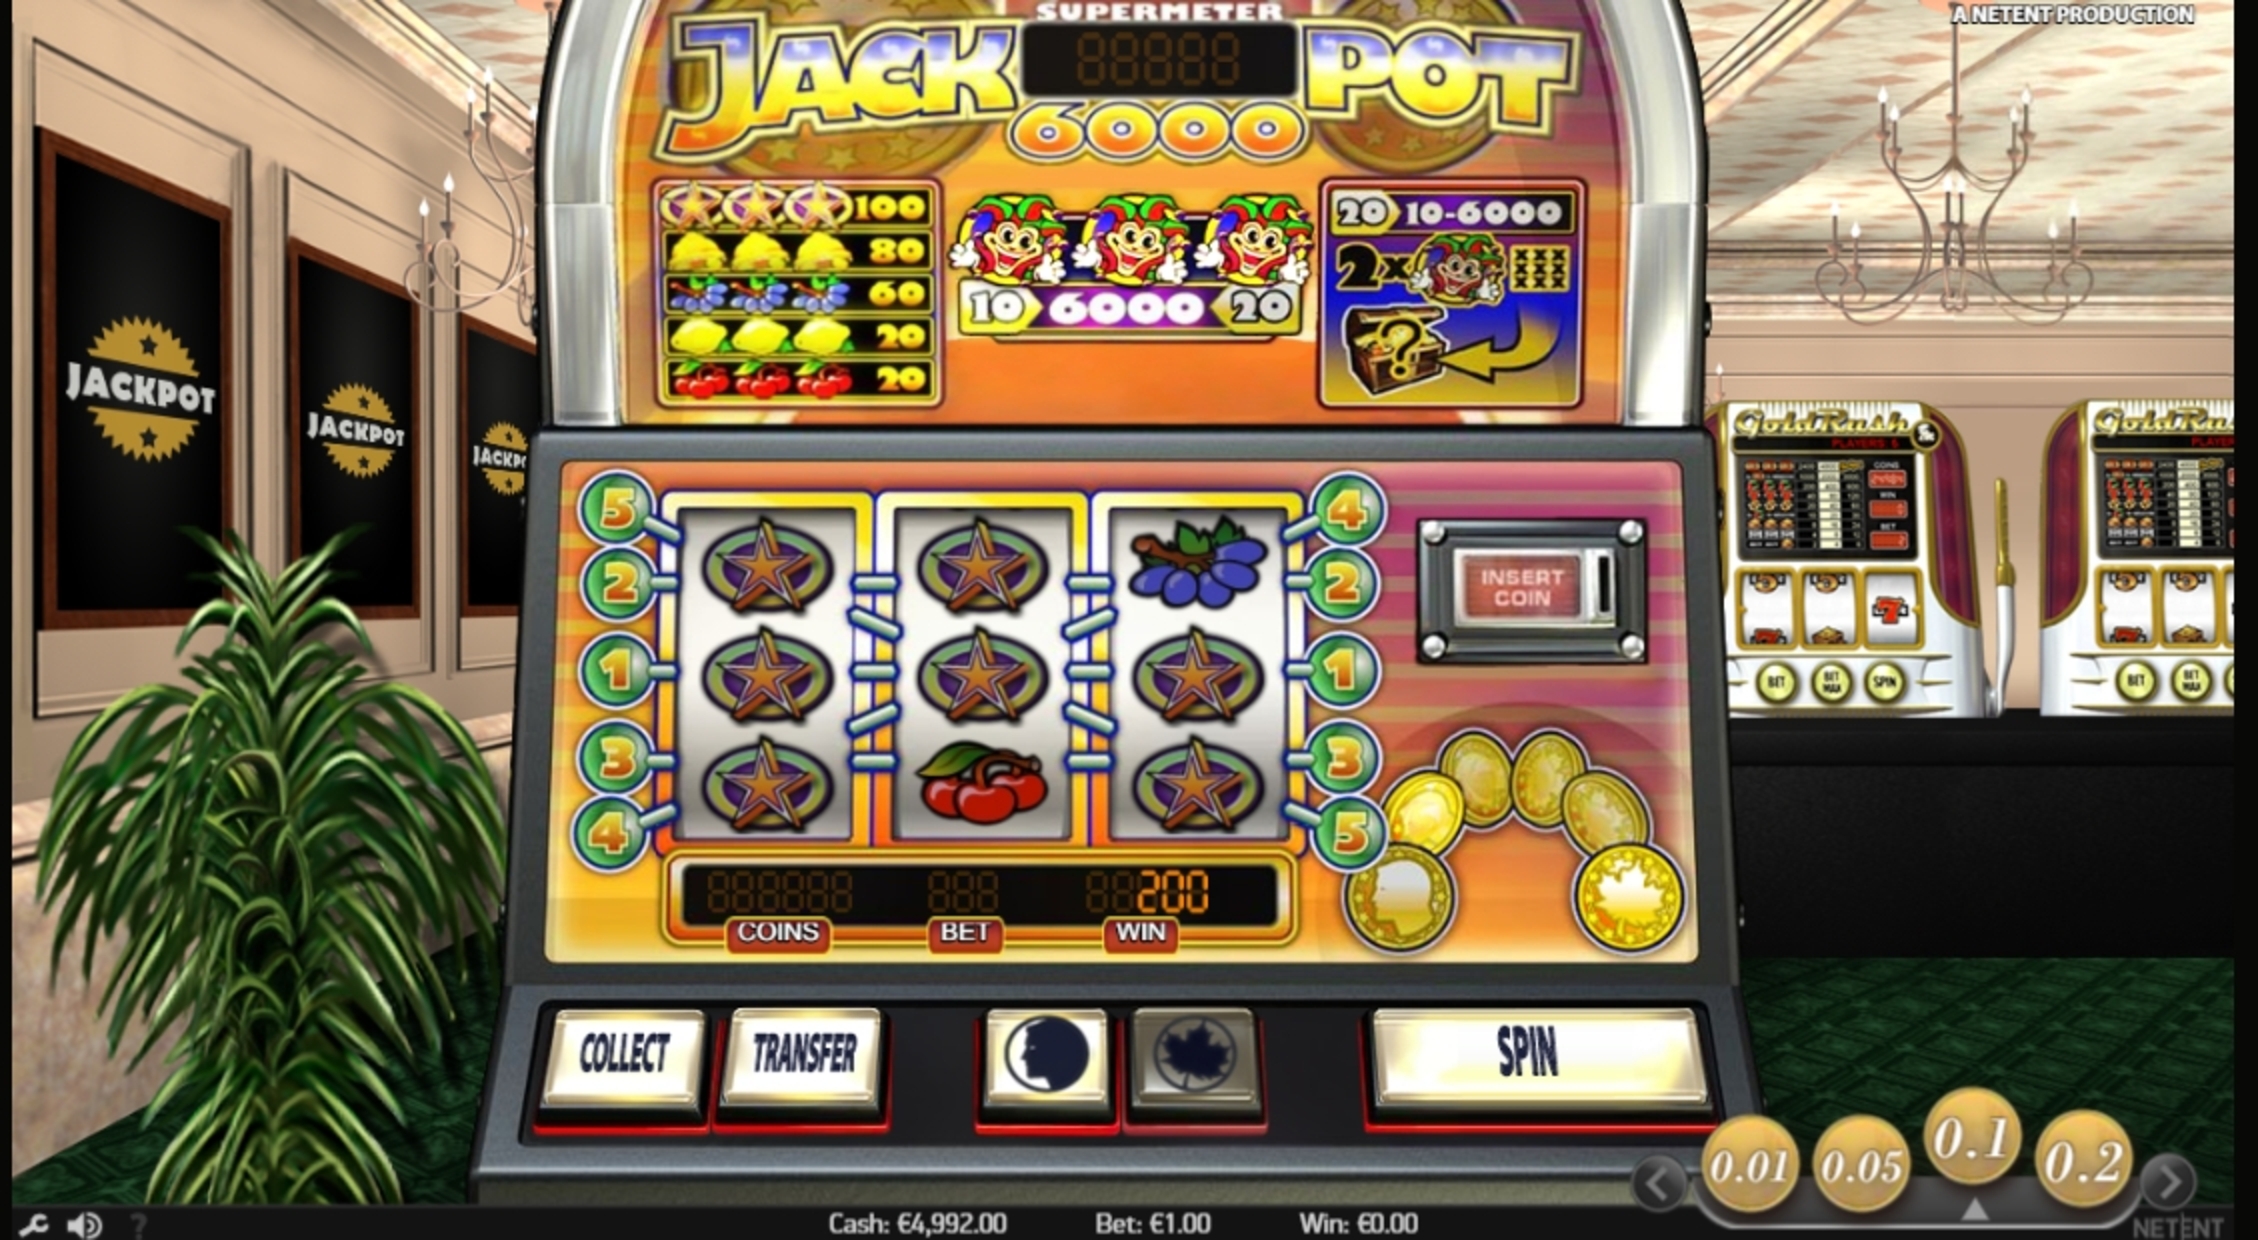 Win Money in Jackpot 6000 Free Slot Game by NetEnt